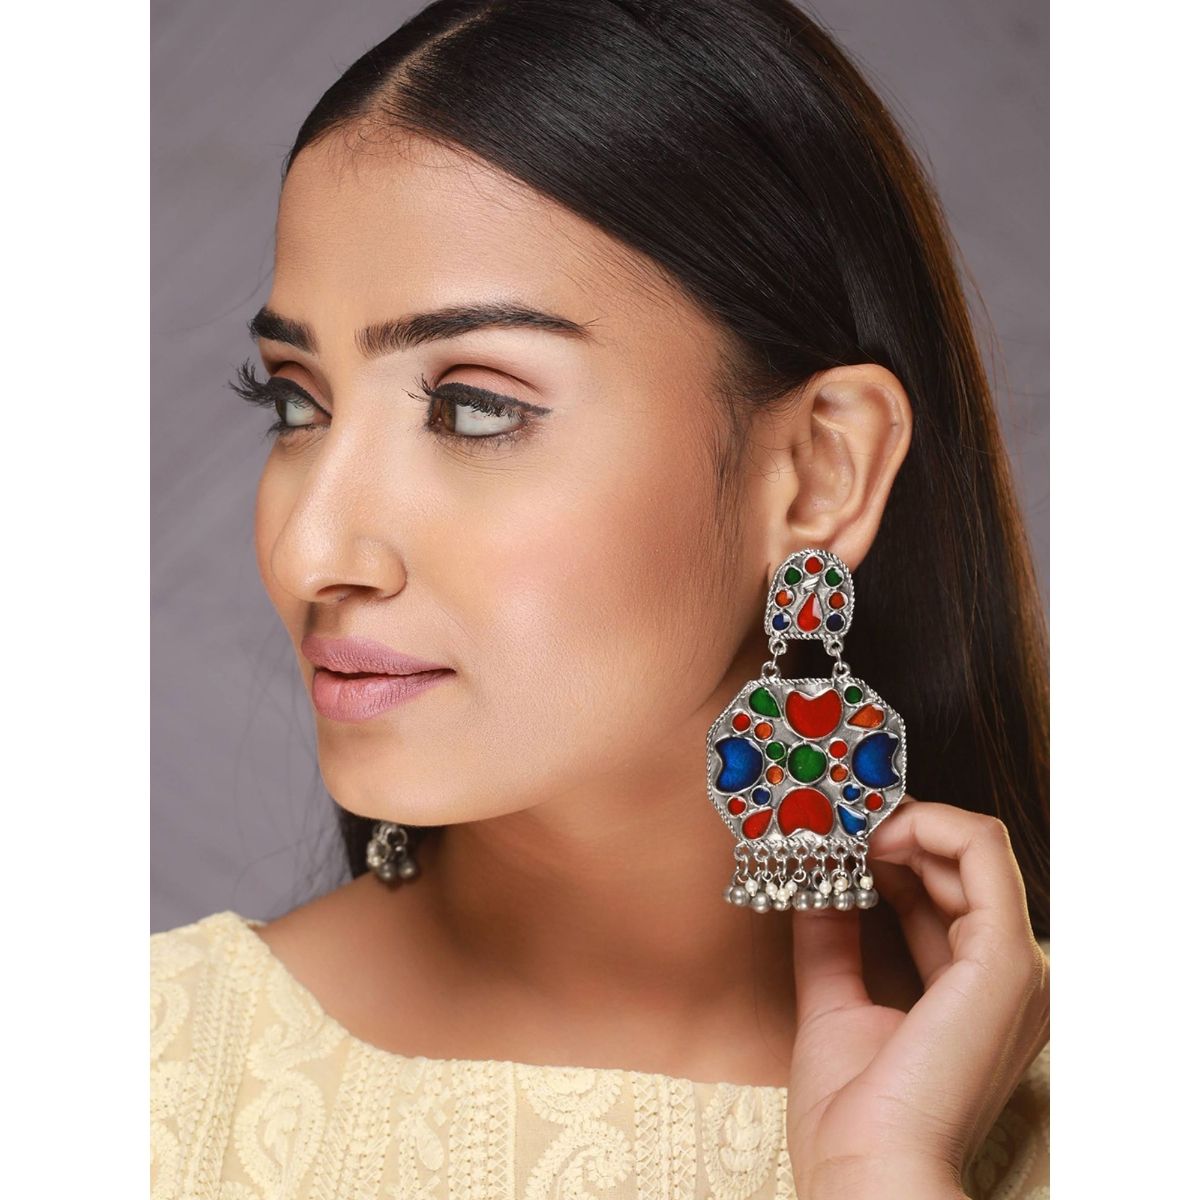 Jazz and Sizzle Earrings  Buy Jazz and Sizzle Silver Toned and Blue  Oxidised Classic Drop Earrings Online  Nykaa Fashion